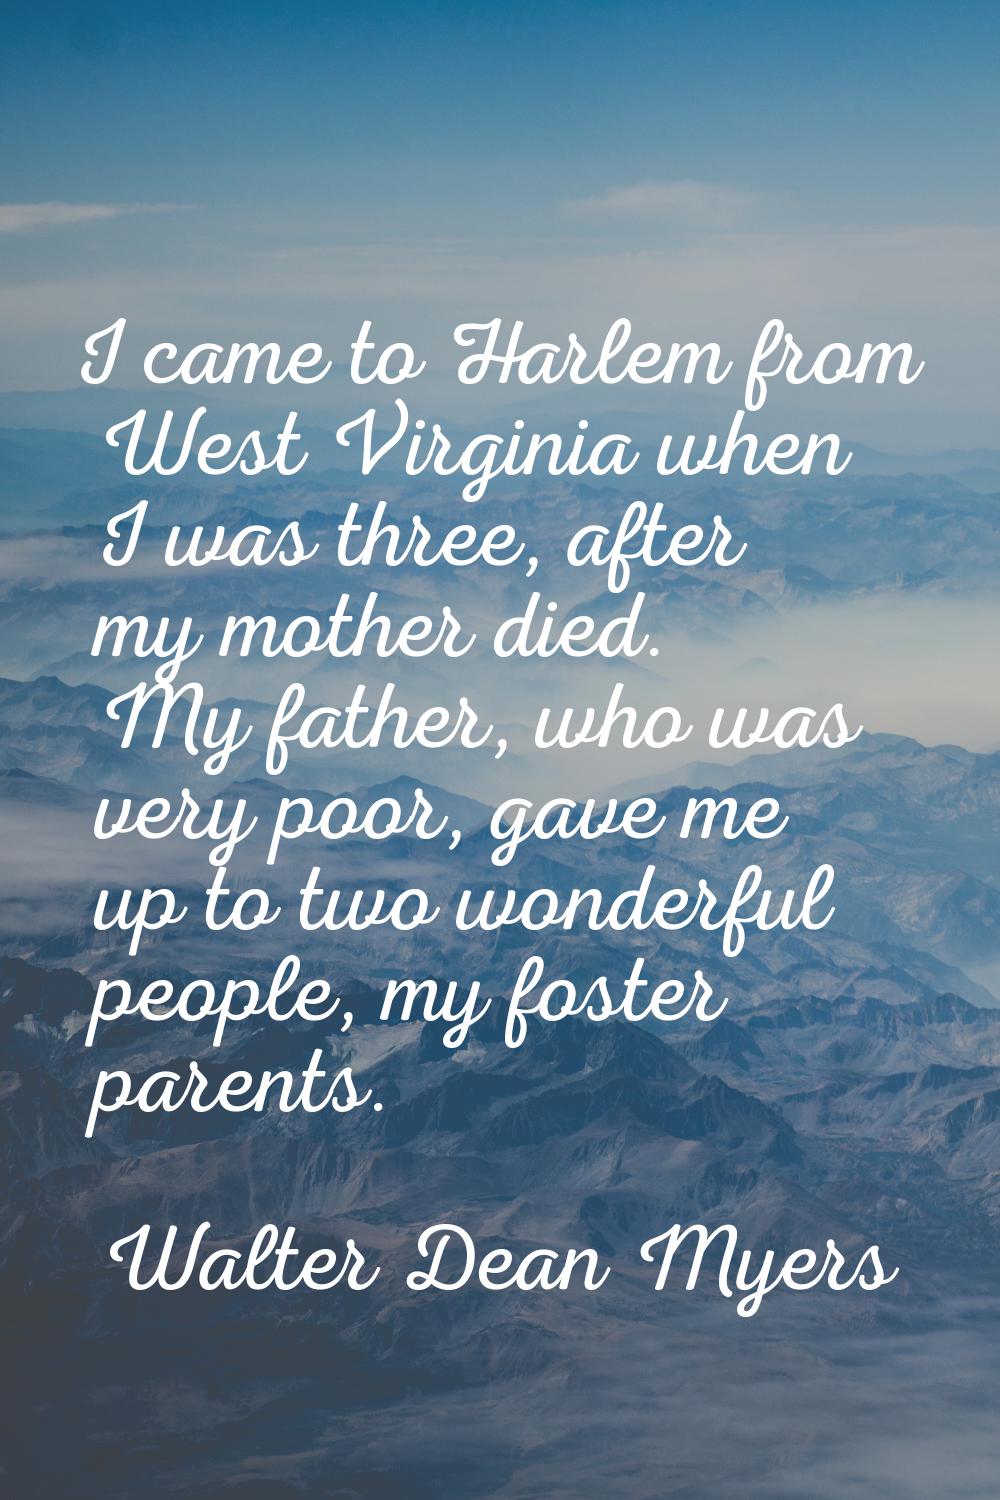 I came to Harlem from West Virginia when I was three, after my mother died. My father, who was very